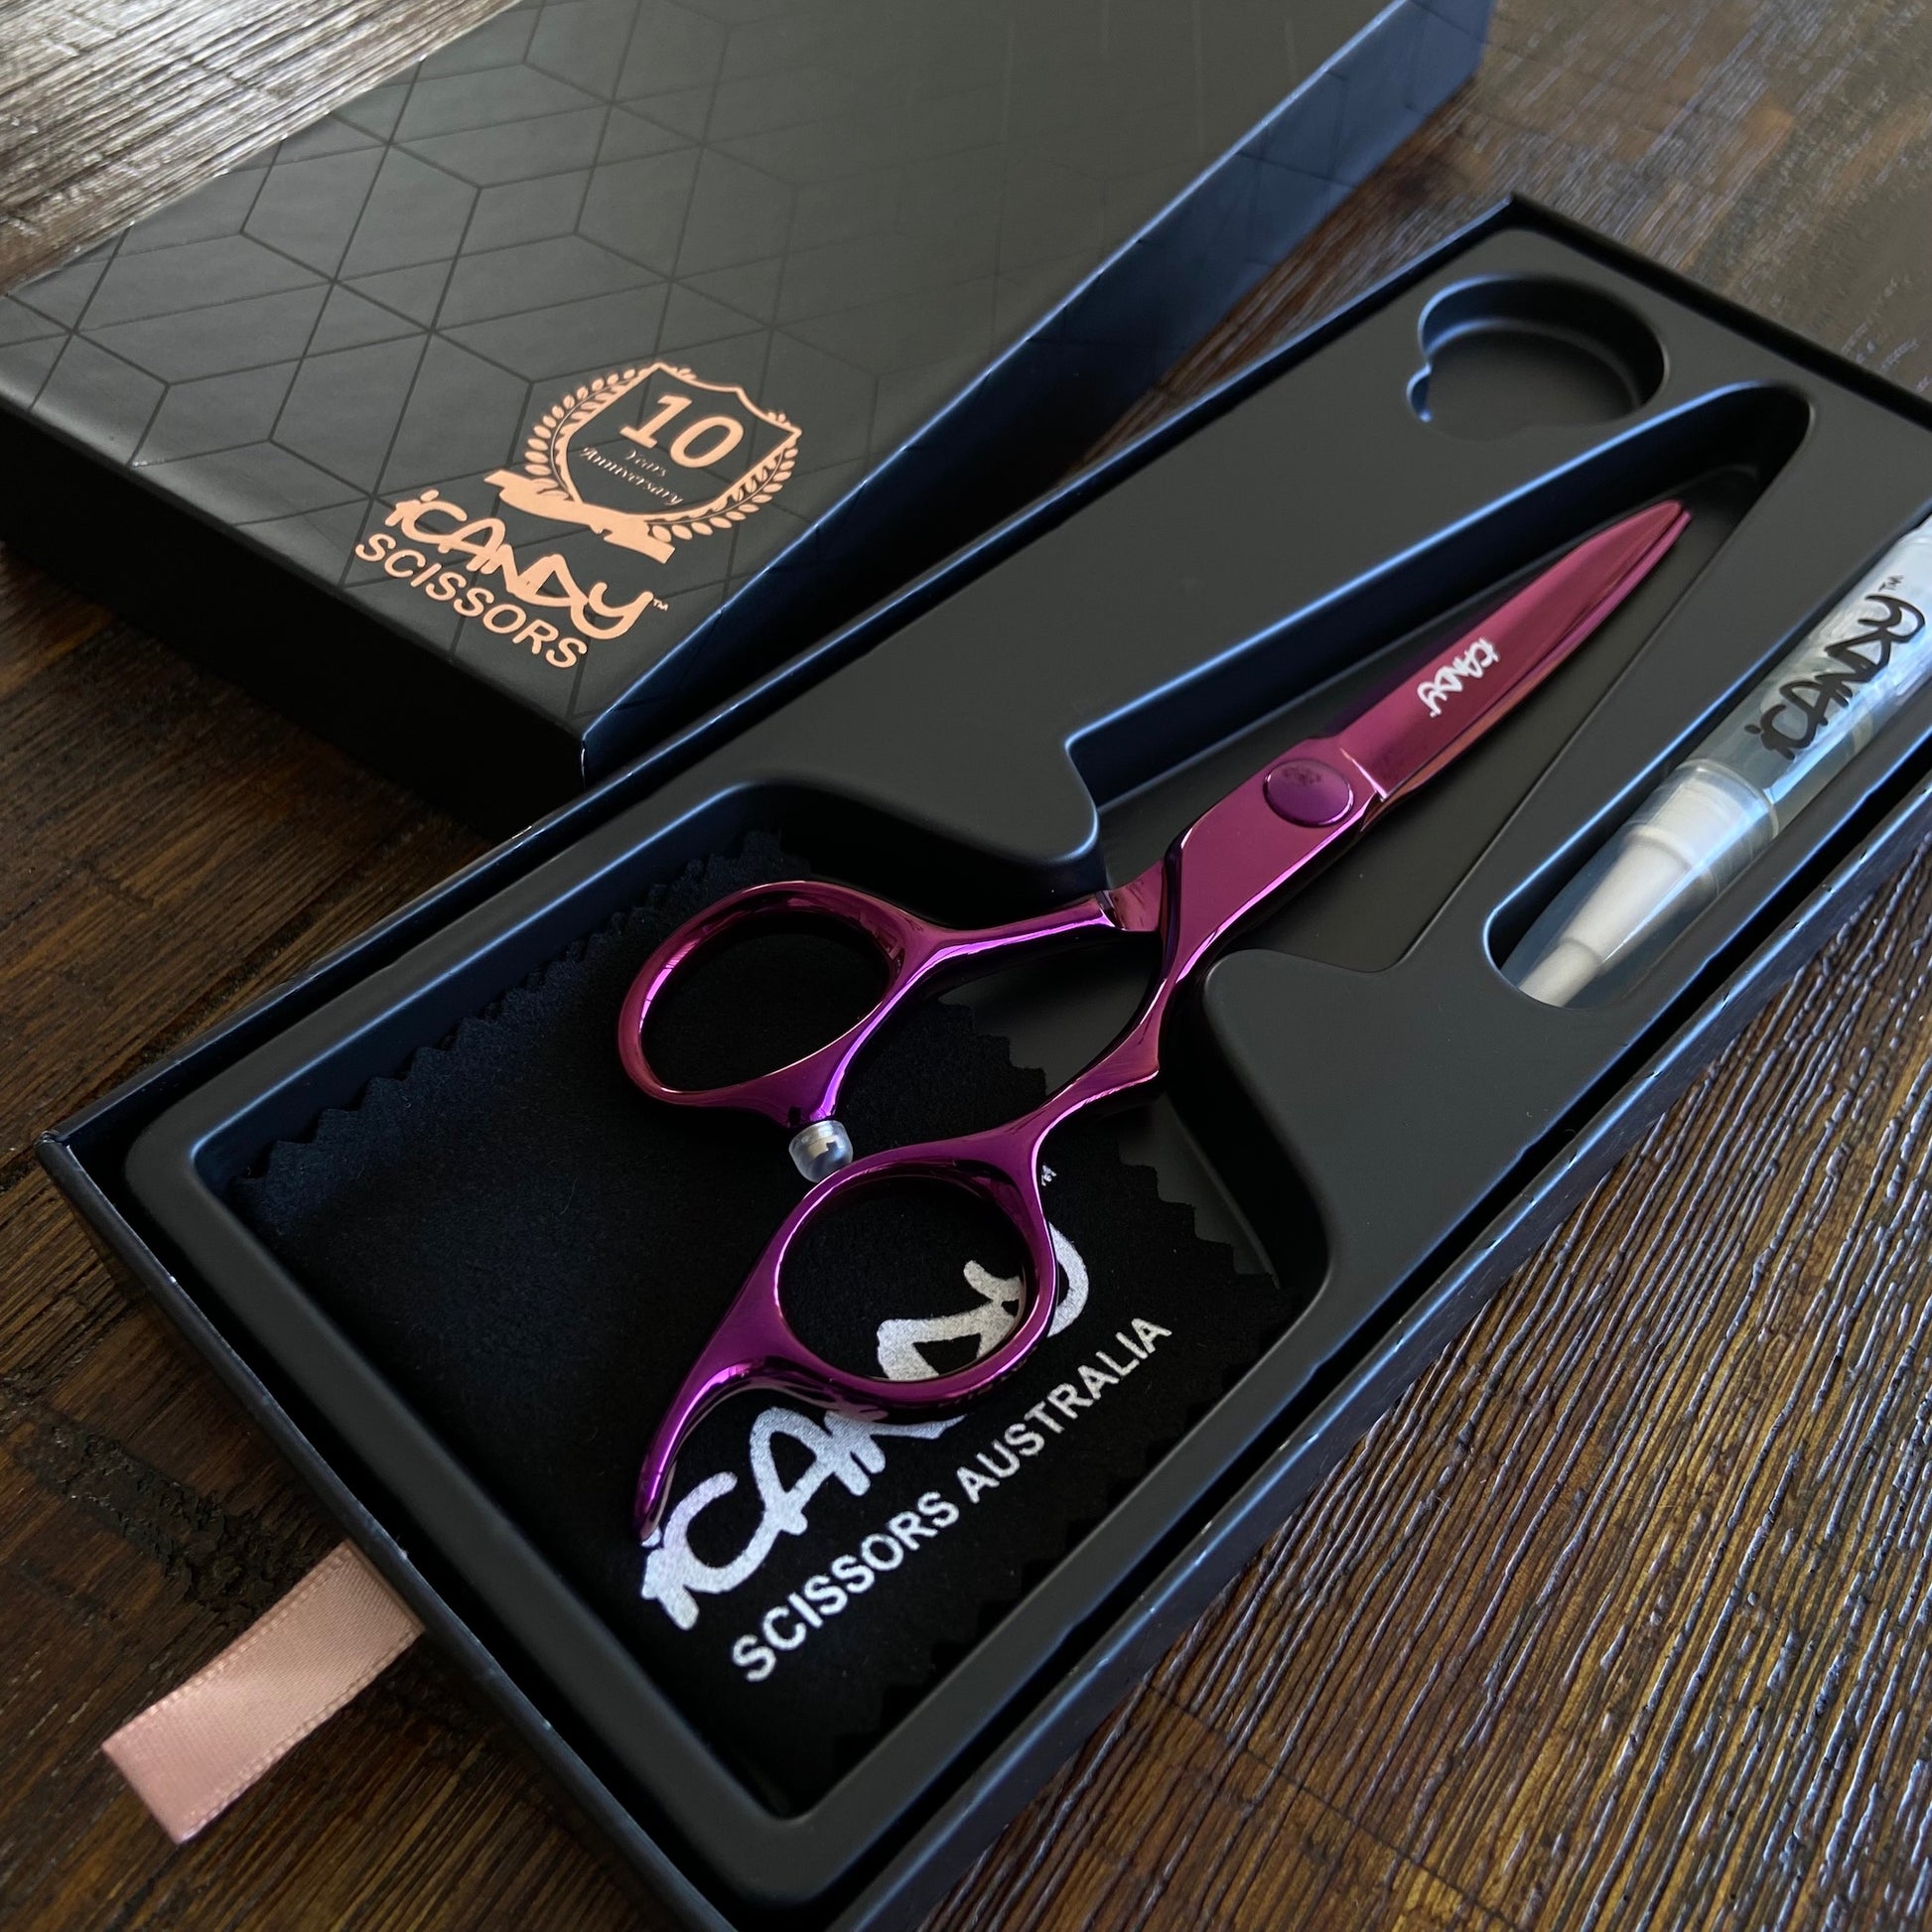 iCandy ELECTRO Ultra Pink VG10 Scissor (6.0 inch) In Box